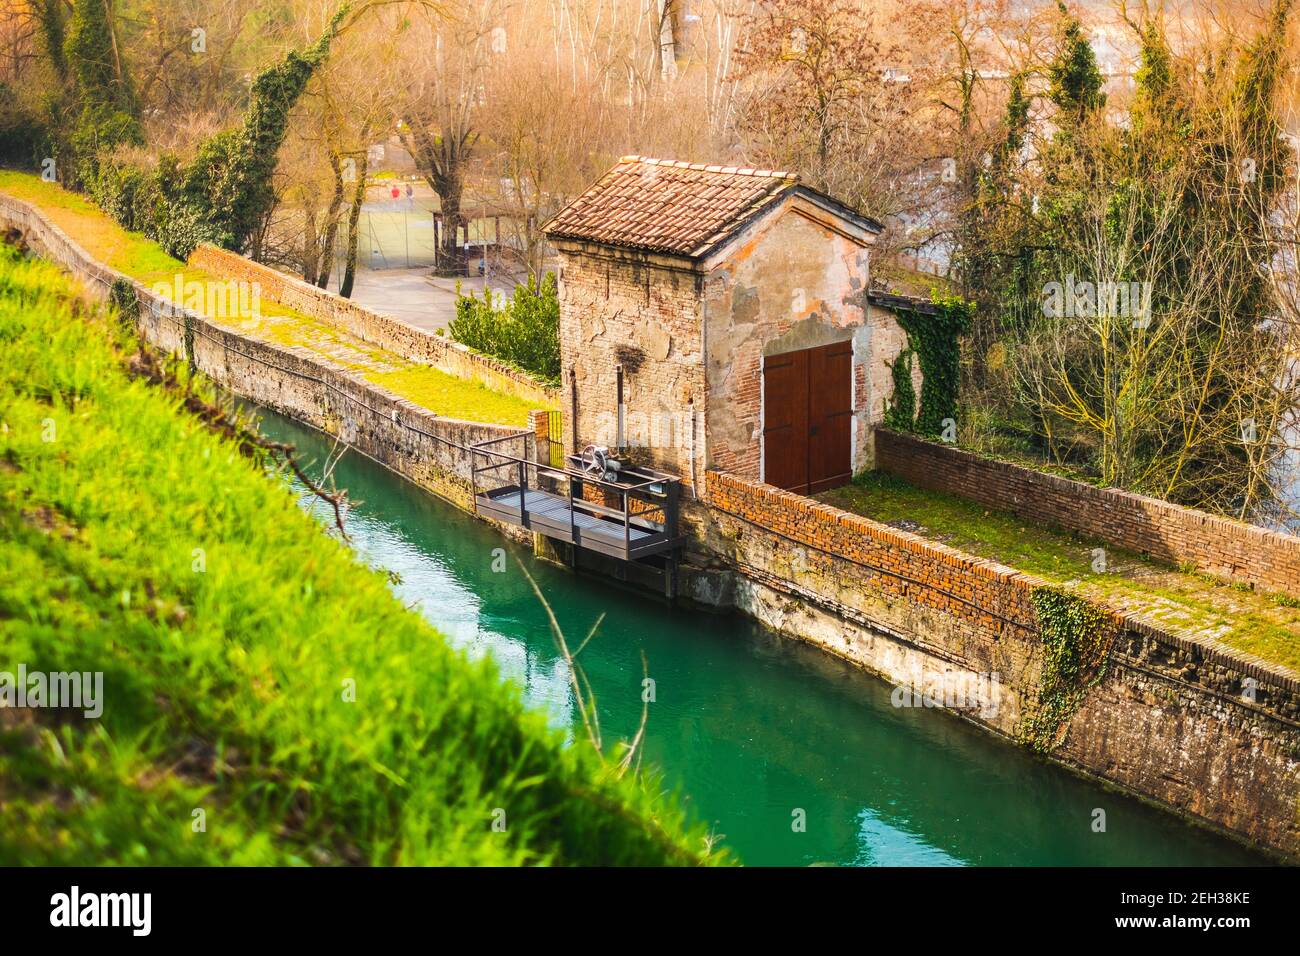 ancient structure of the river lock along the canal surrounded by thick vegetation Stock Photo